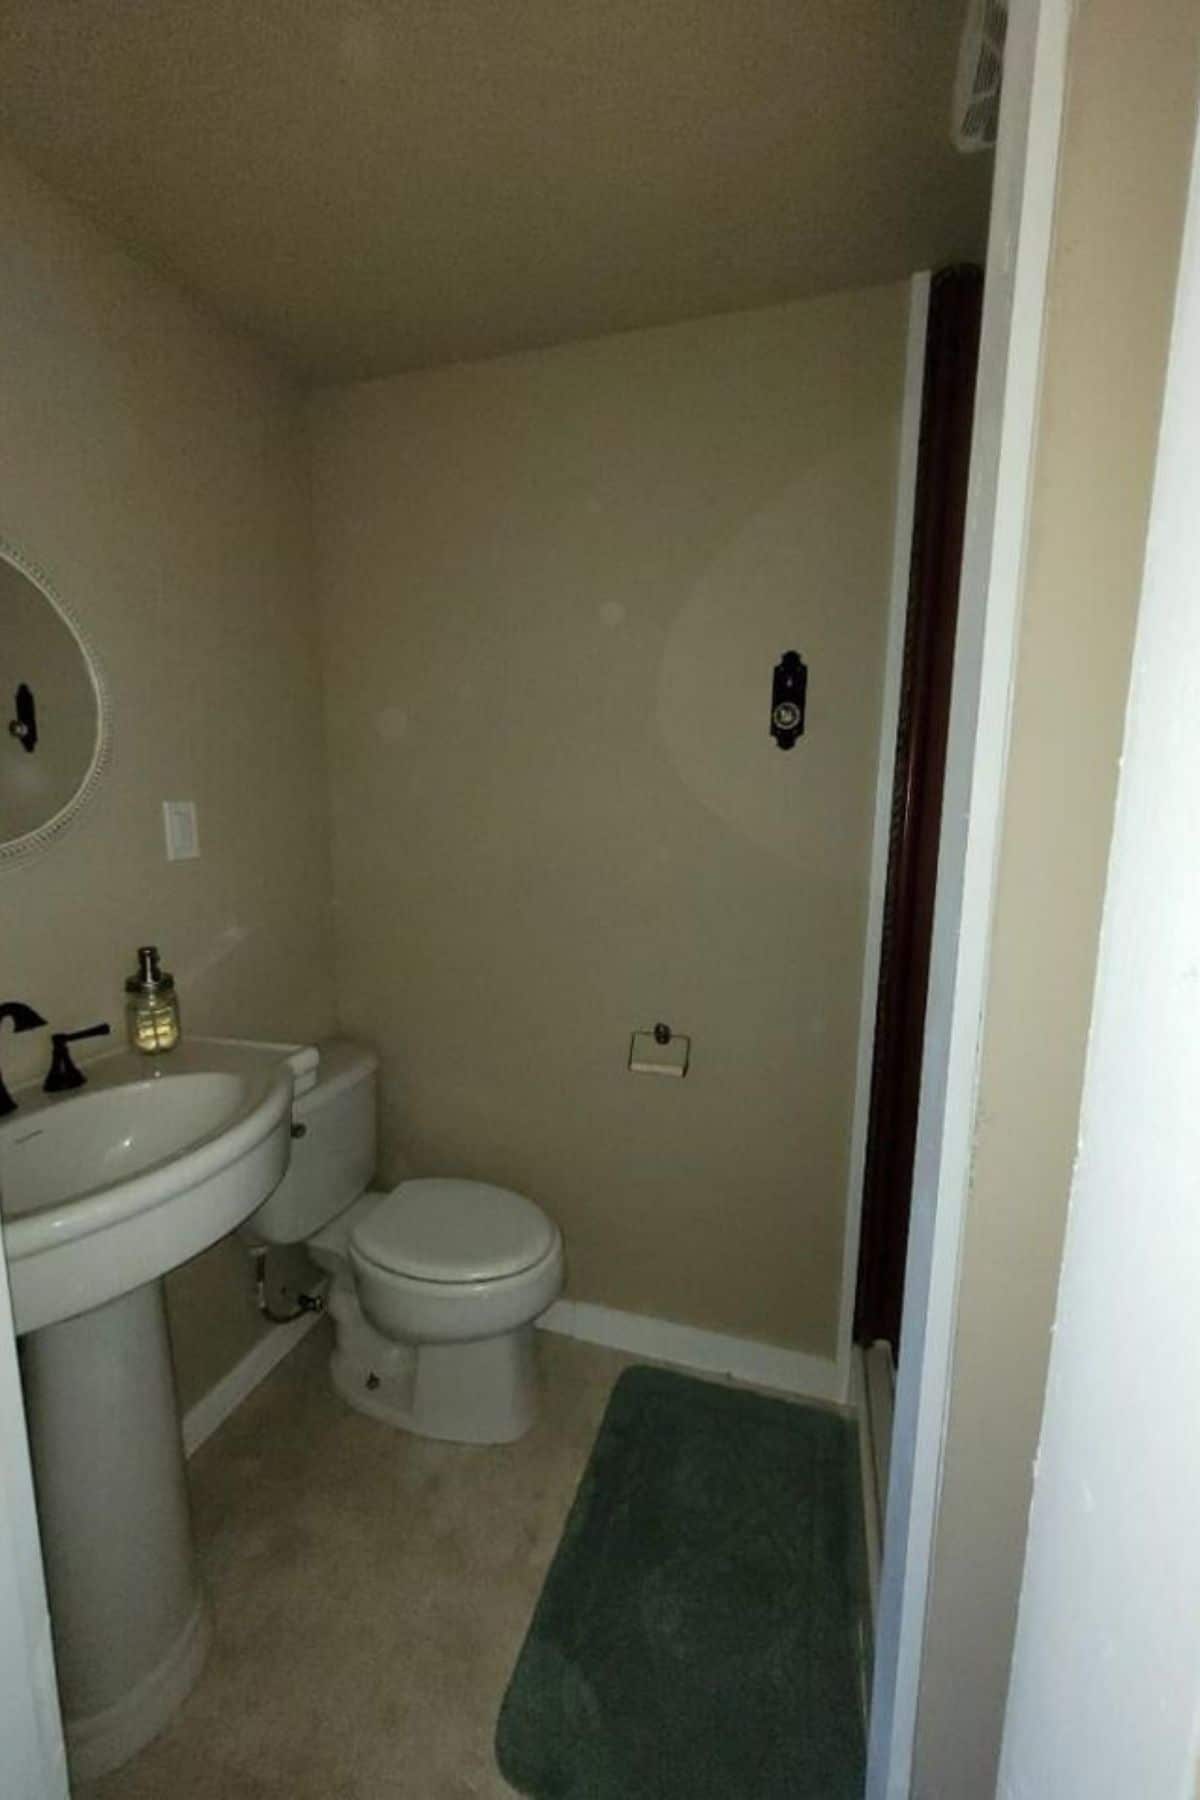 Bathroom with flush toilet and pedestal sink on left walli